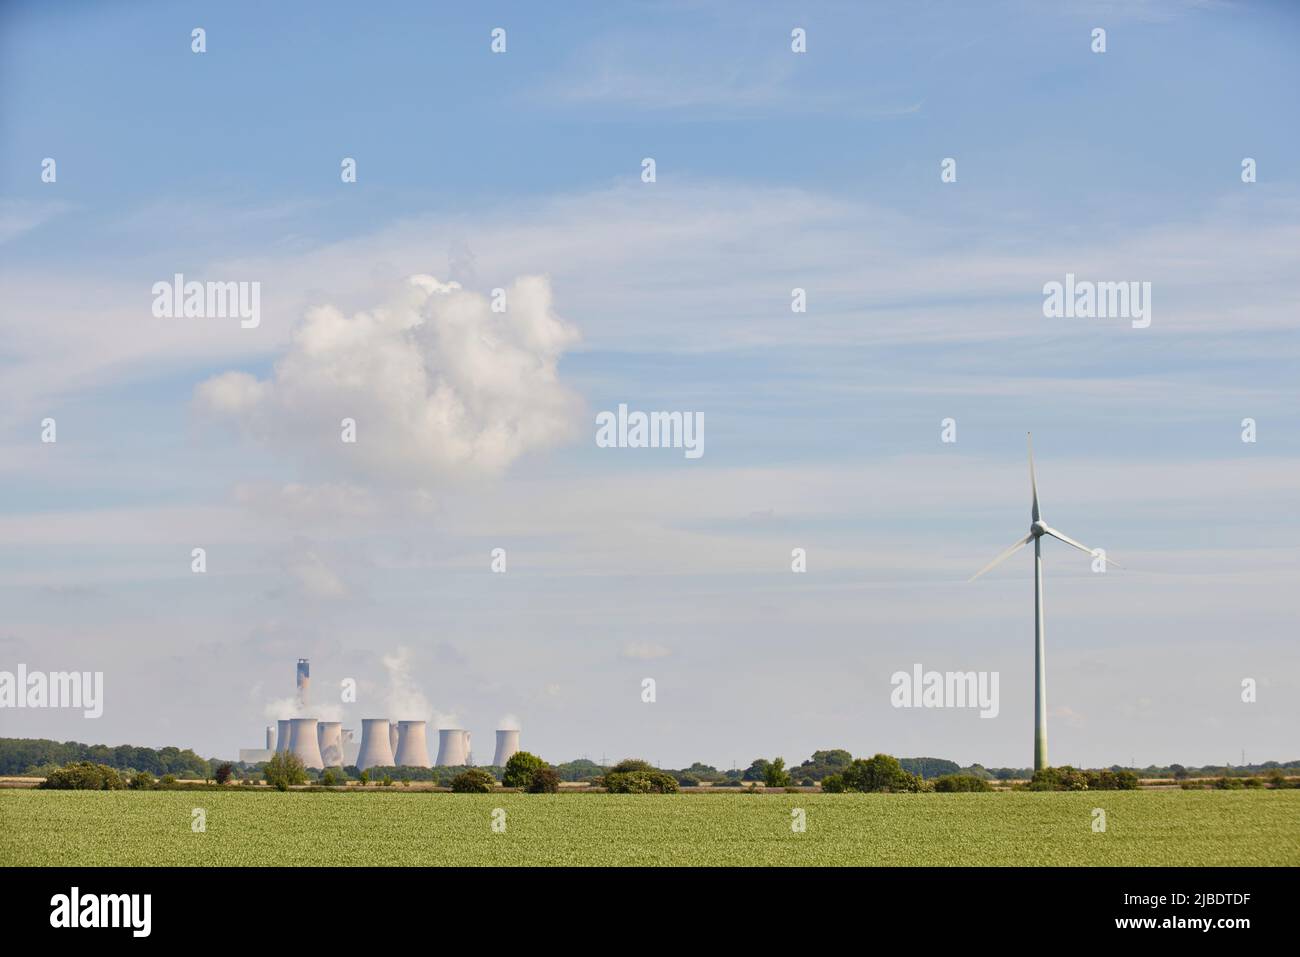 Drax power station is a large biomass power station in North Yorkshire, England, capable of co-firing petroleum coke Stock Photo